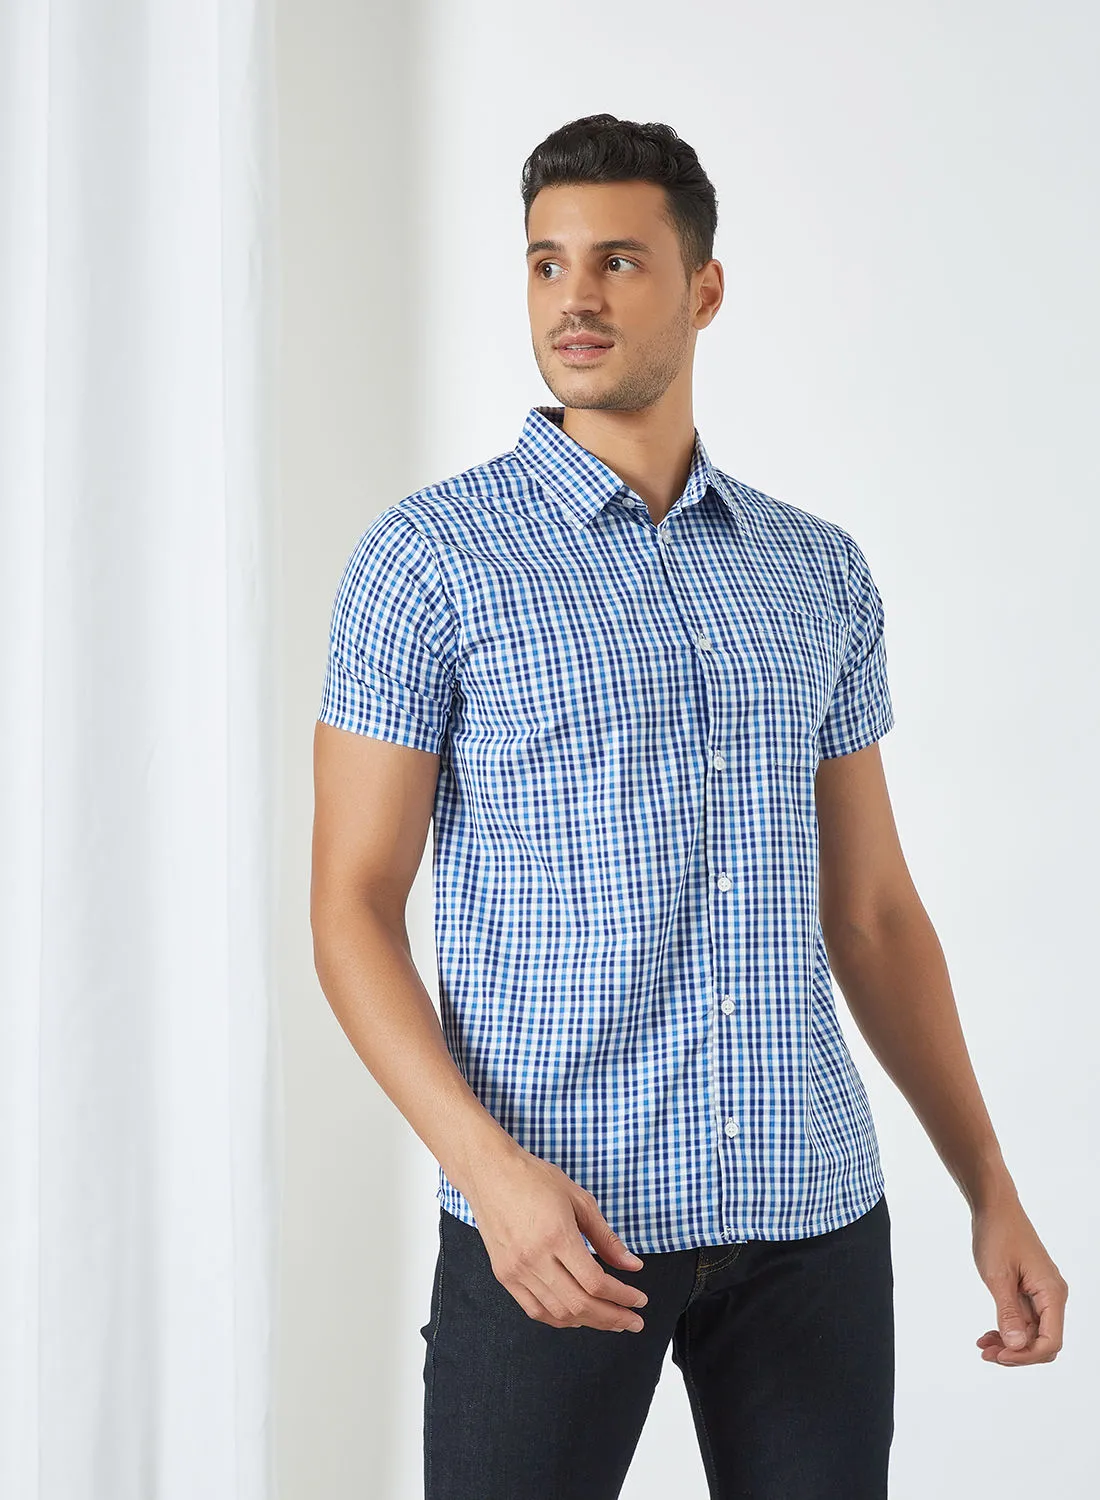 STATE 8 Patch Pocket Gingham Shirt Blue